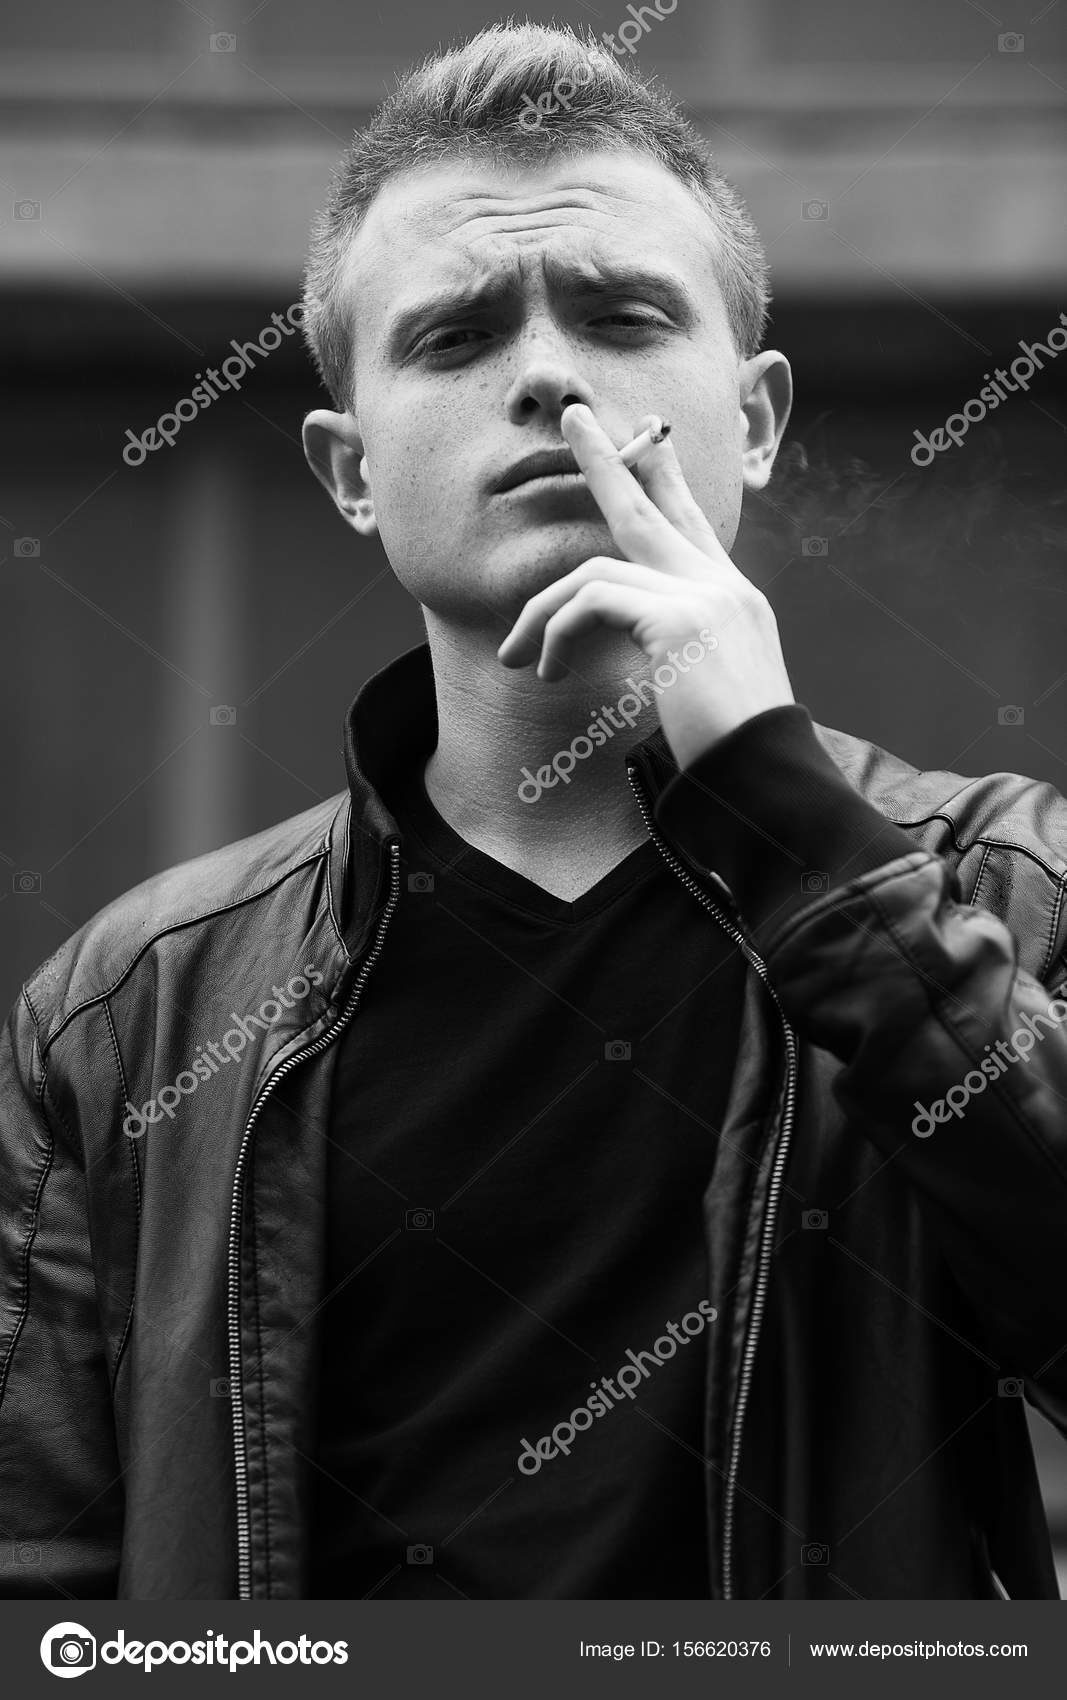 bad-boy-concept-portrait-of-brutal-young-man-with-short-hair-we